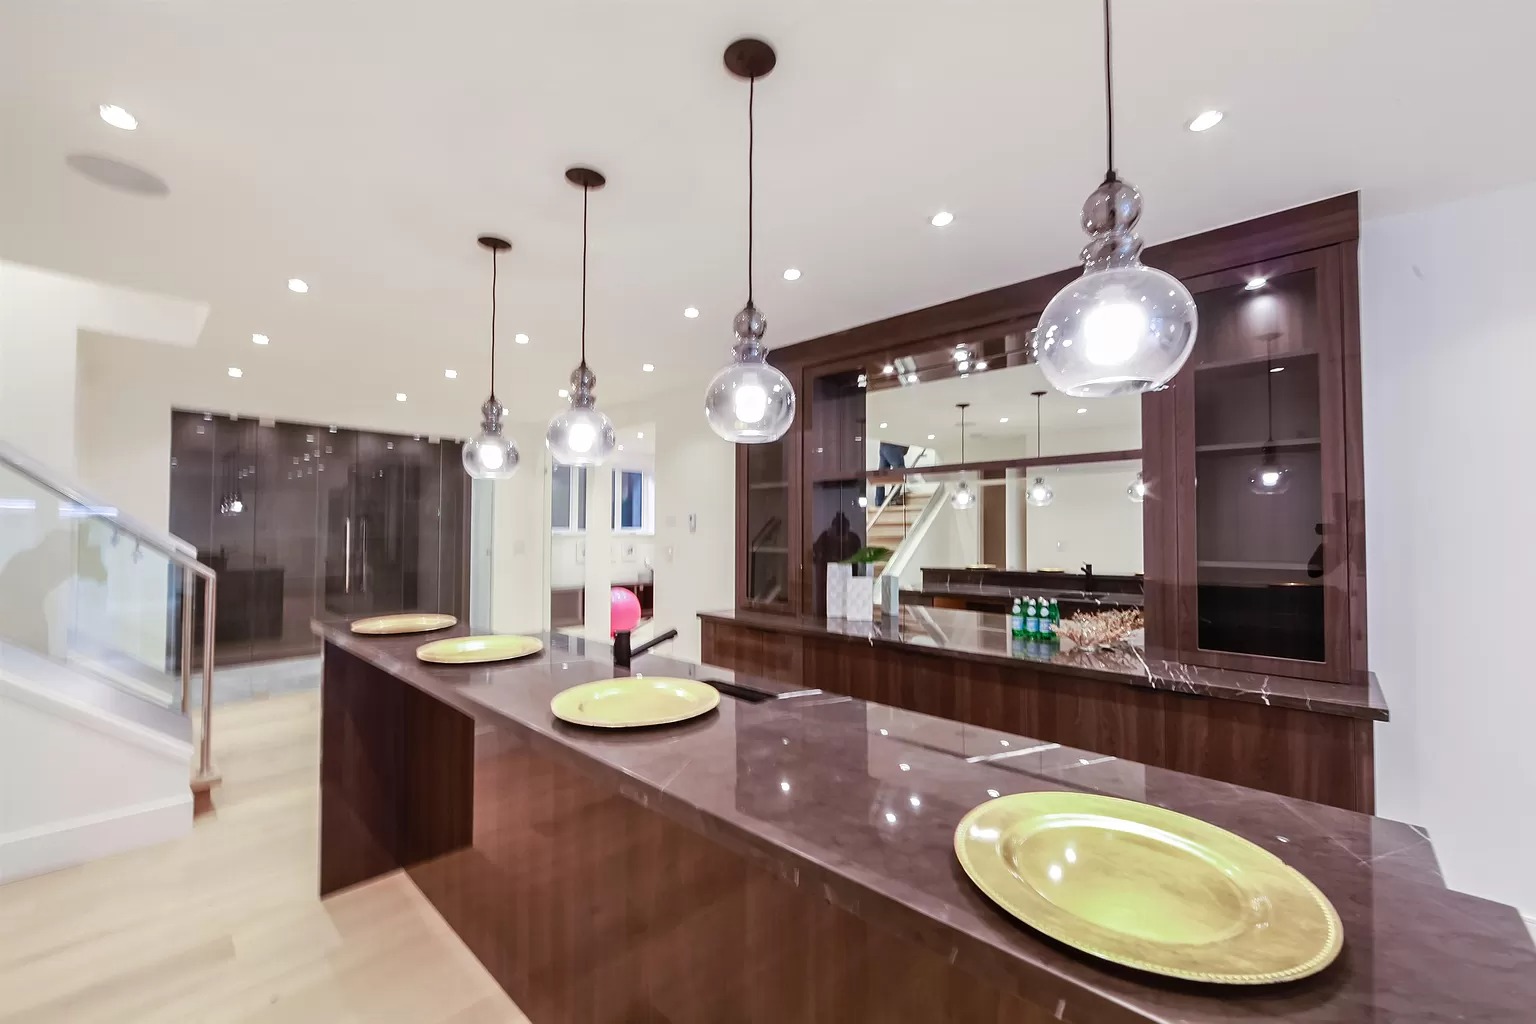 Luxury-Inspiration-Abounds-in-This-C4288000-Elegant-House-in-Burnaby-9